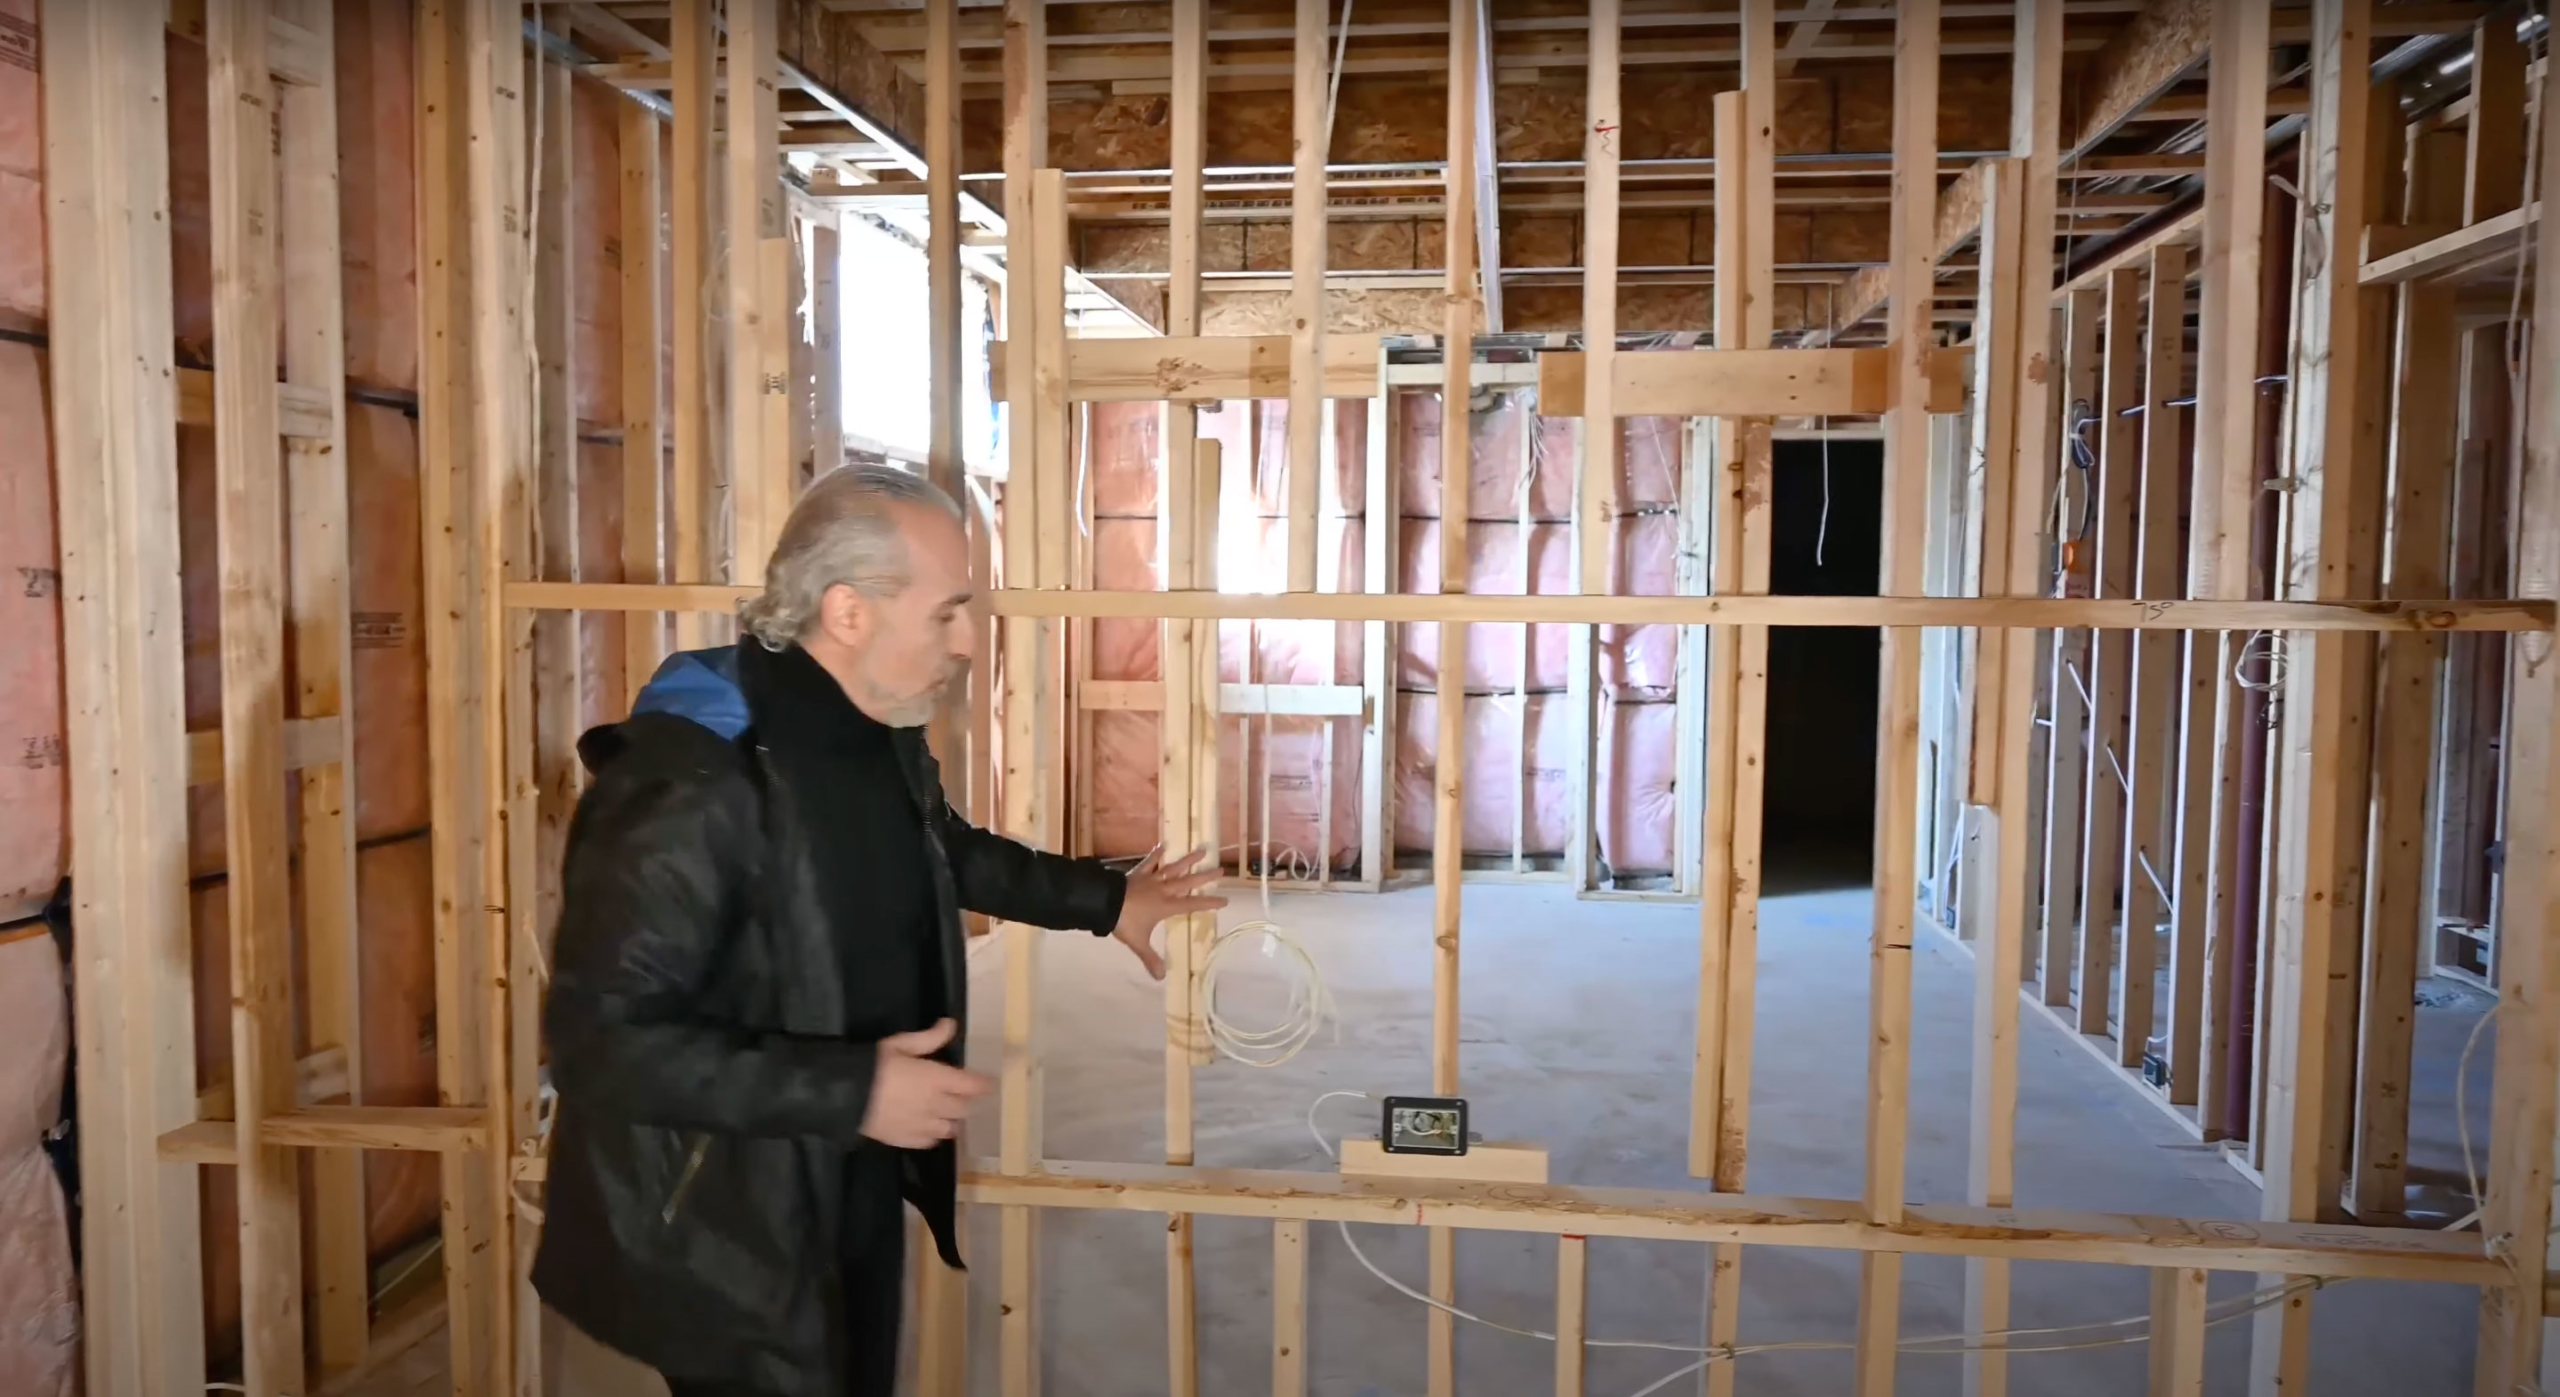 Bespoke in the Burbs YouTube Series Shows How to Plan for a Home Theater